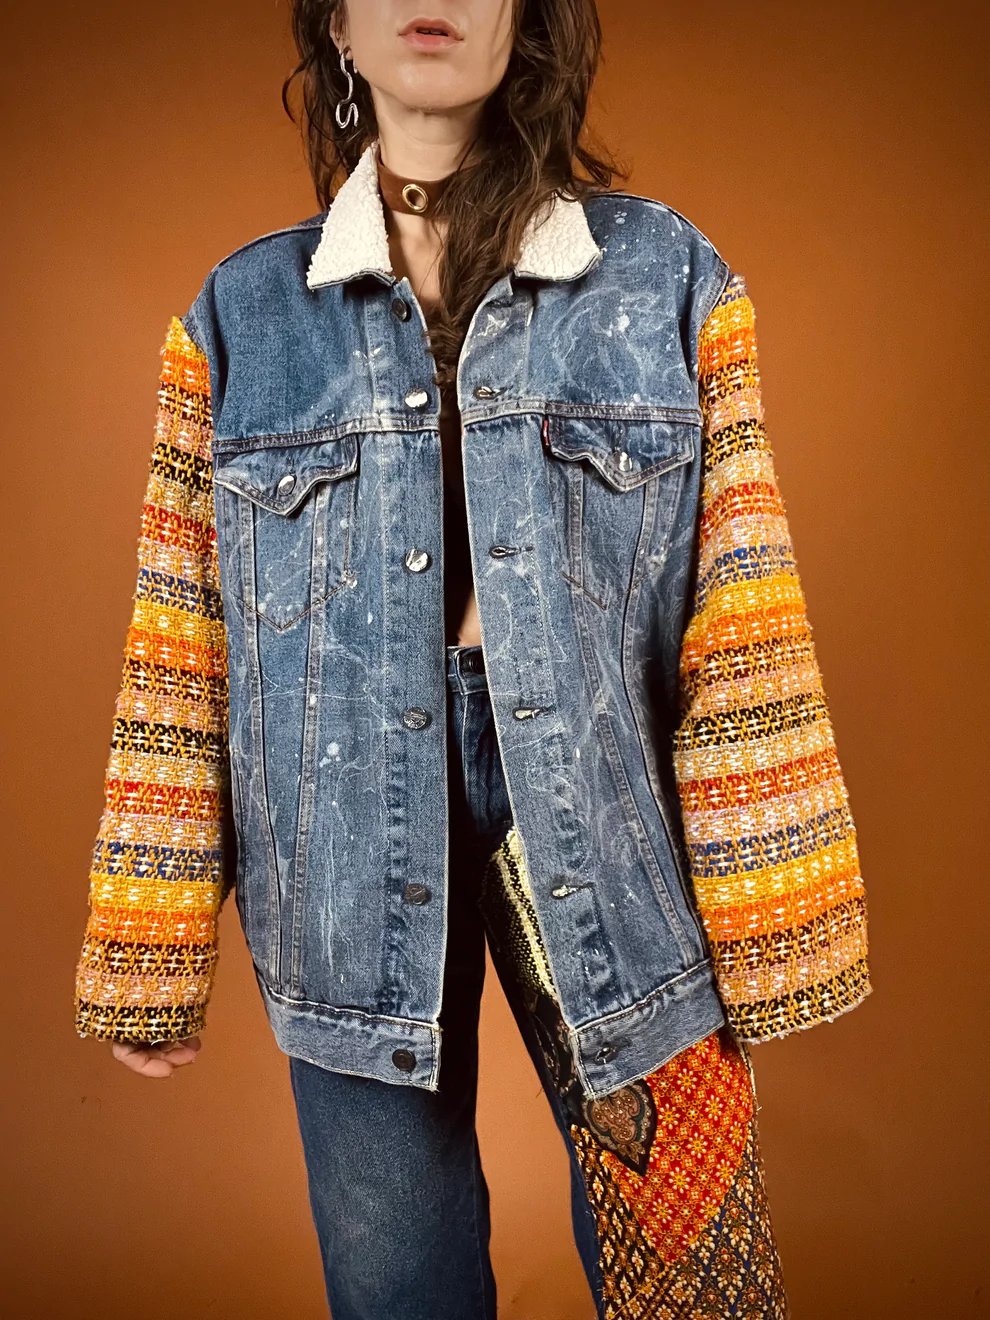 a woman wearing a jean jacket with a colorful sleeve.